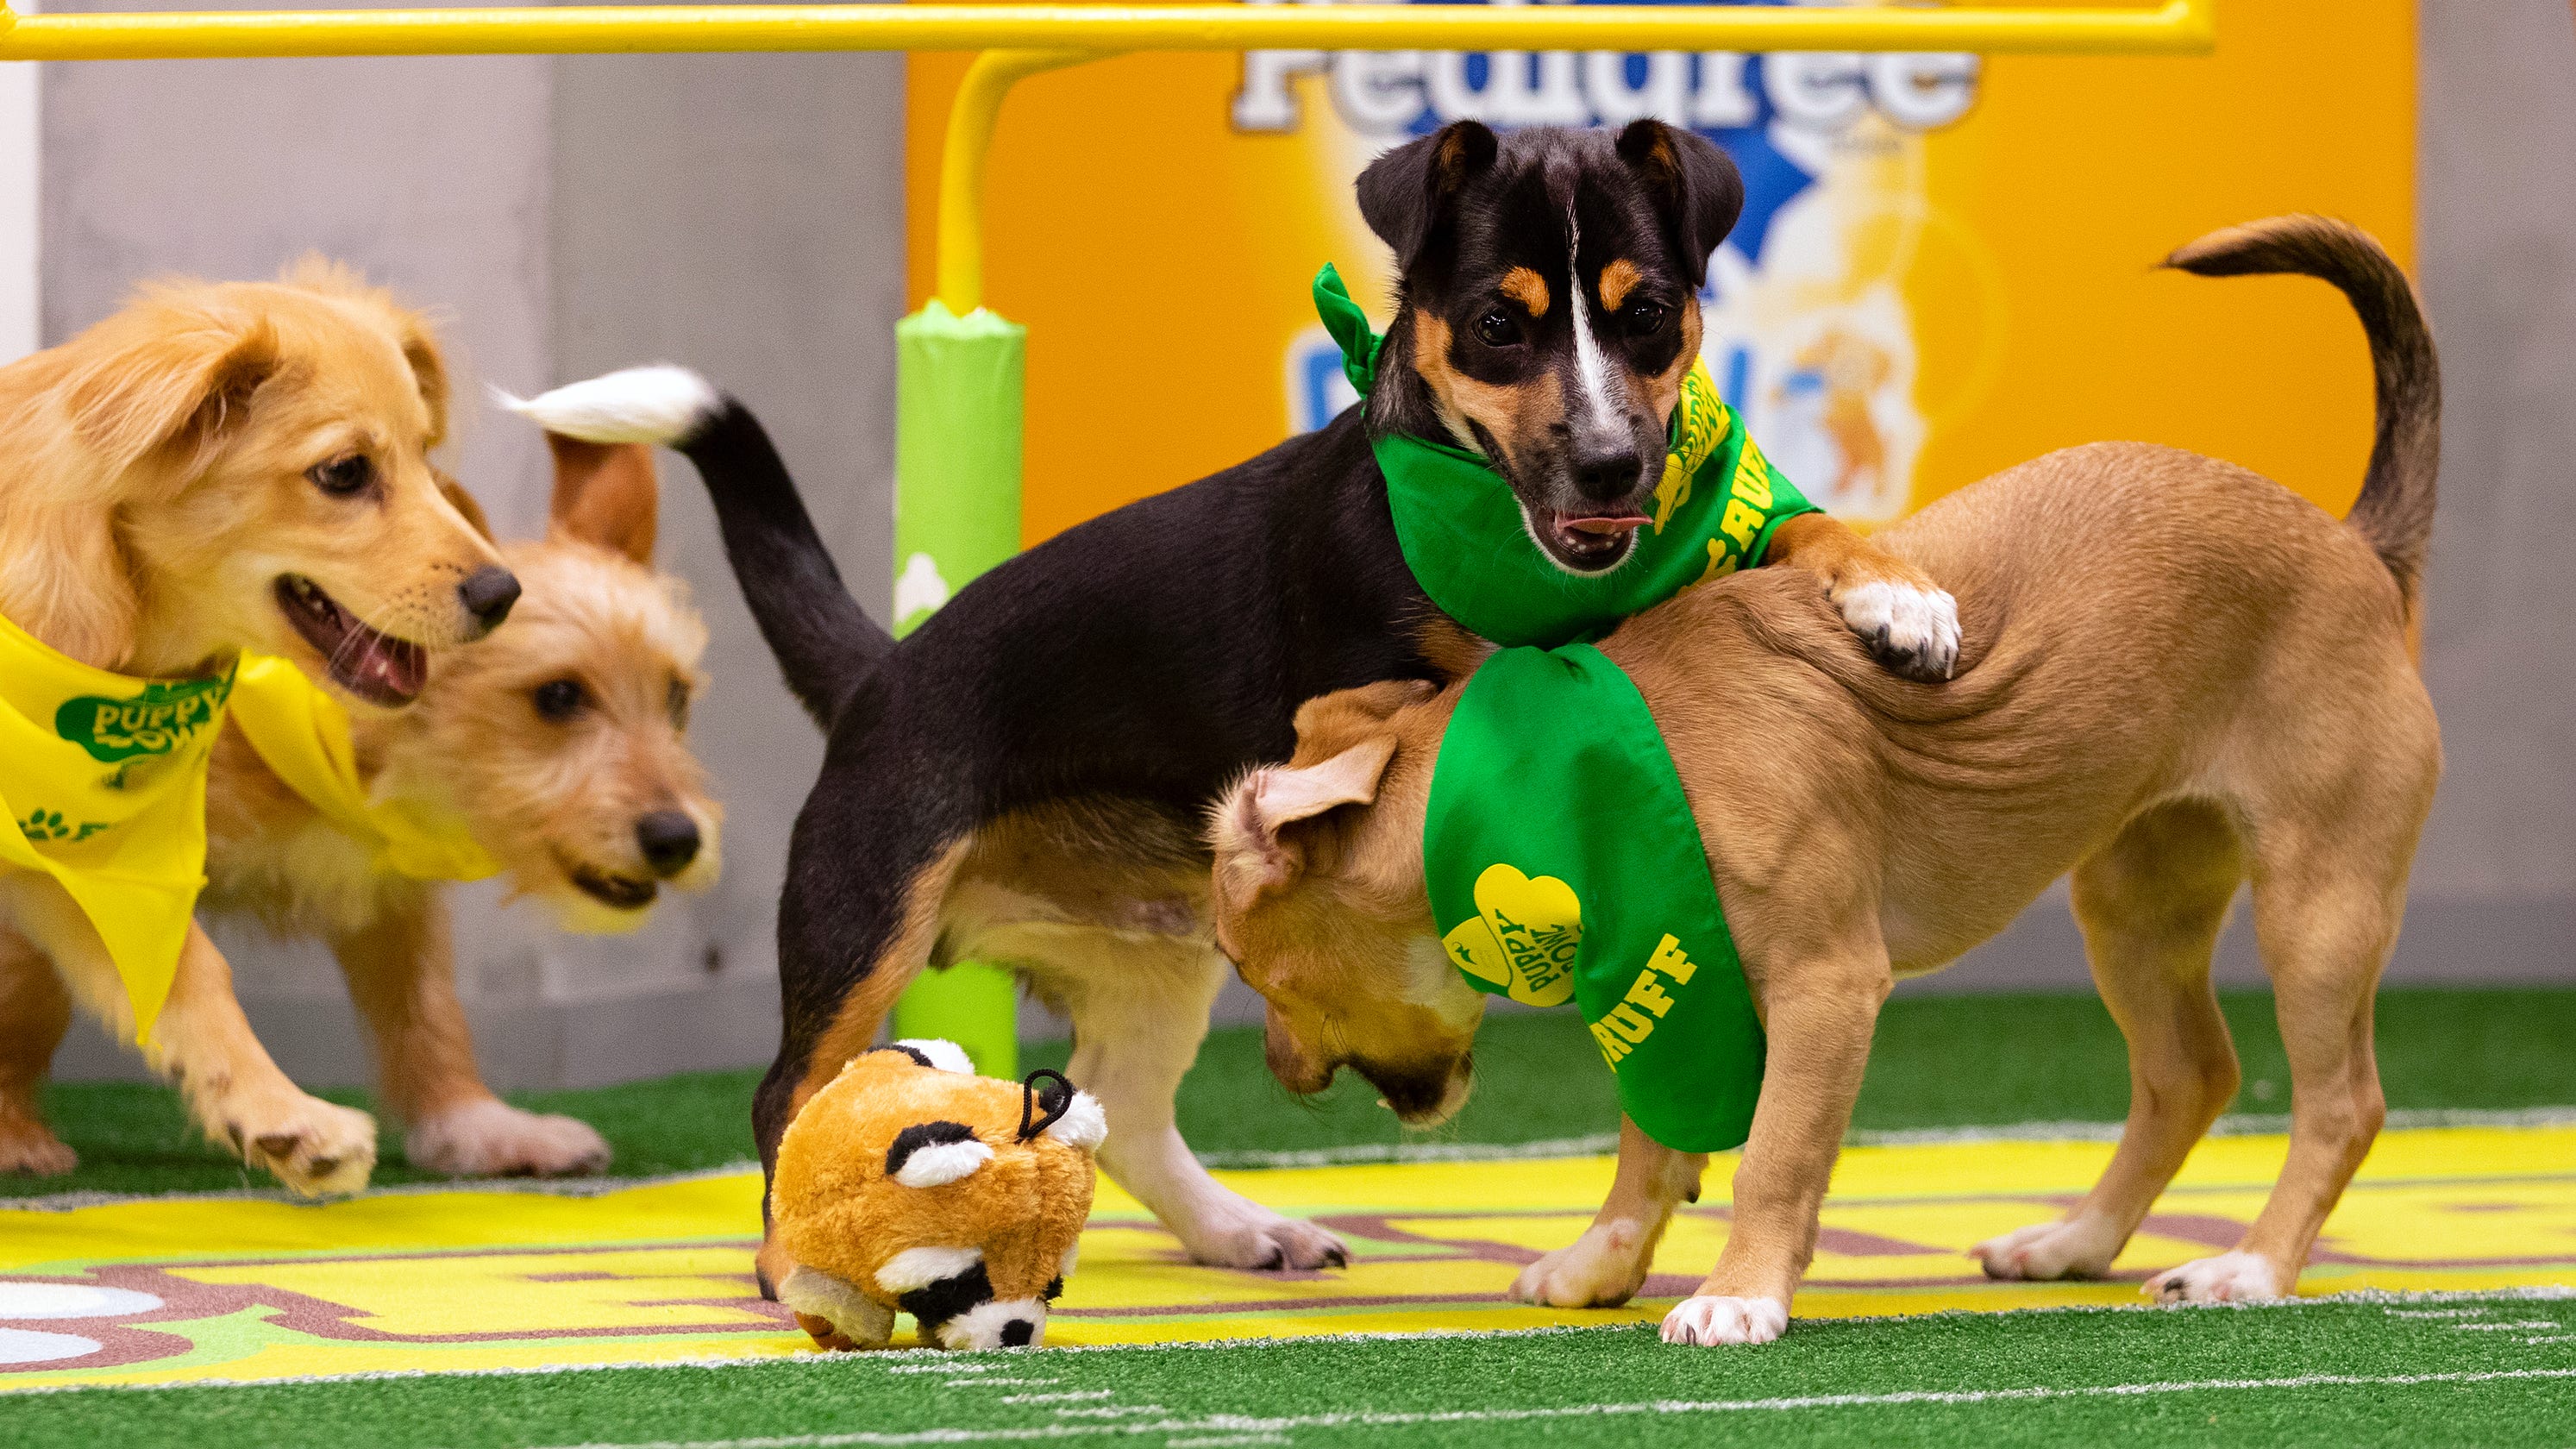 Puppy Bowl 2019: 6 Nashville dogs to compete in Animal Planet's Super Bowl show2987 x 1680